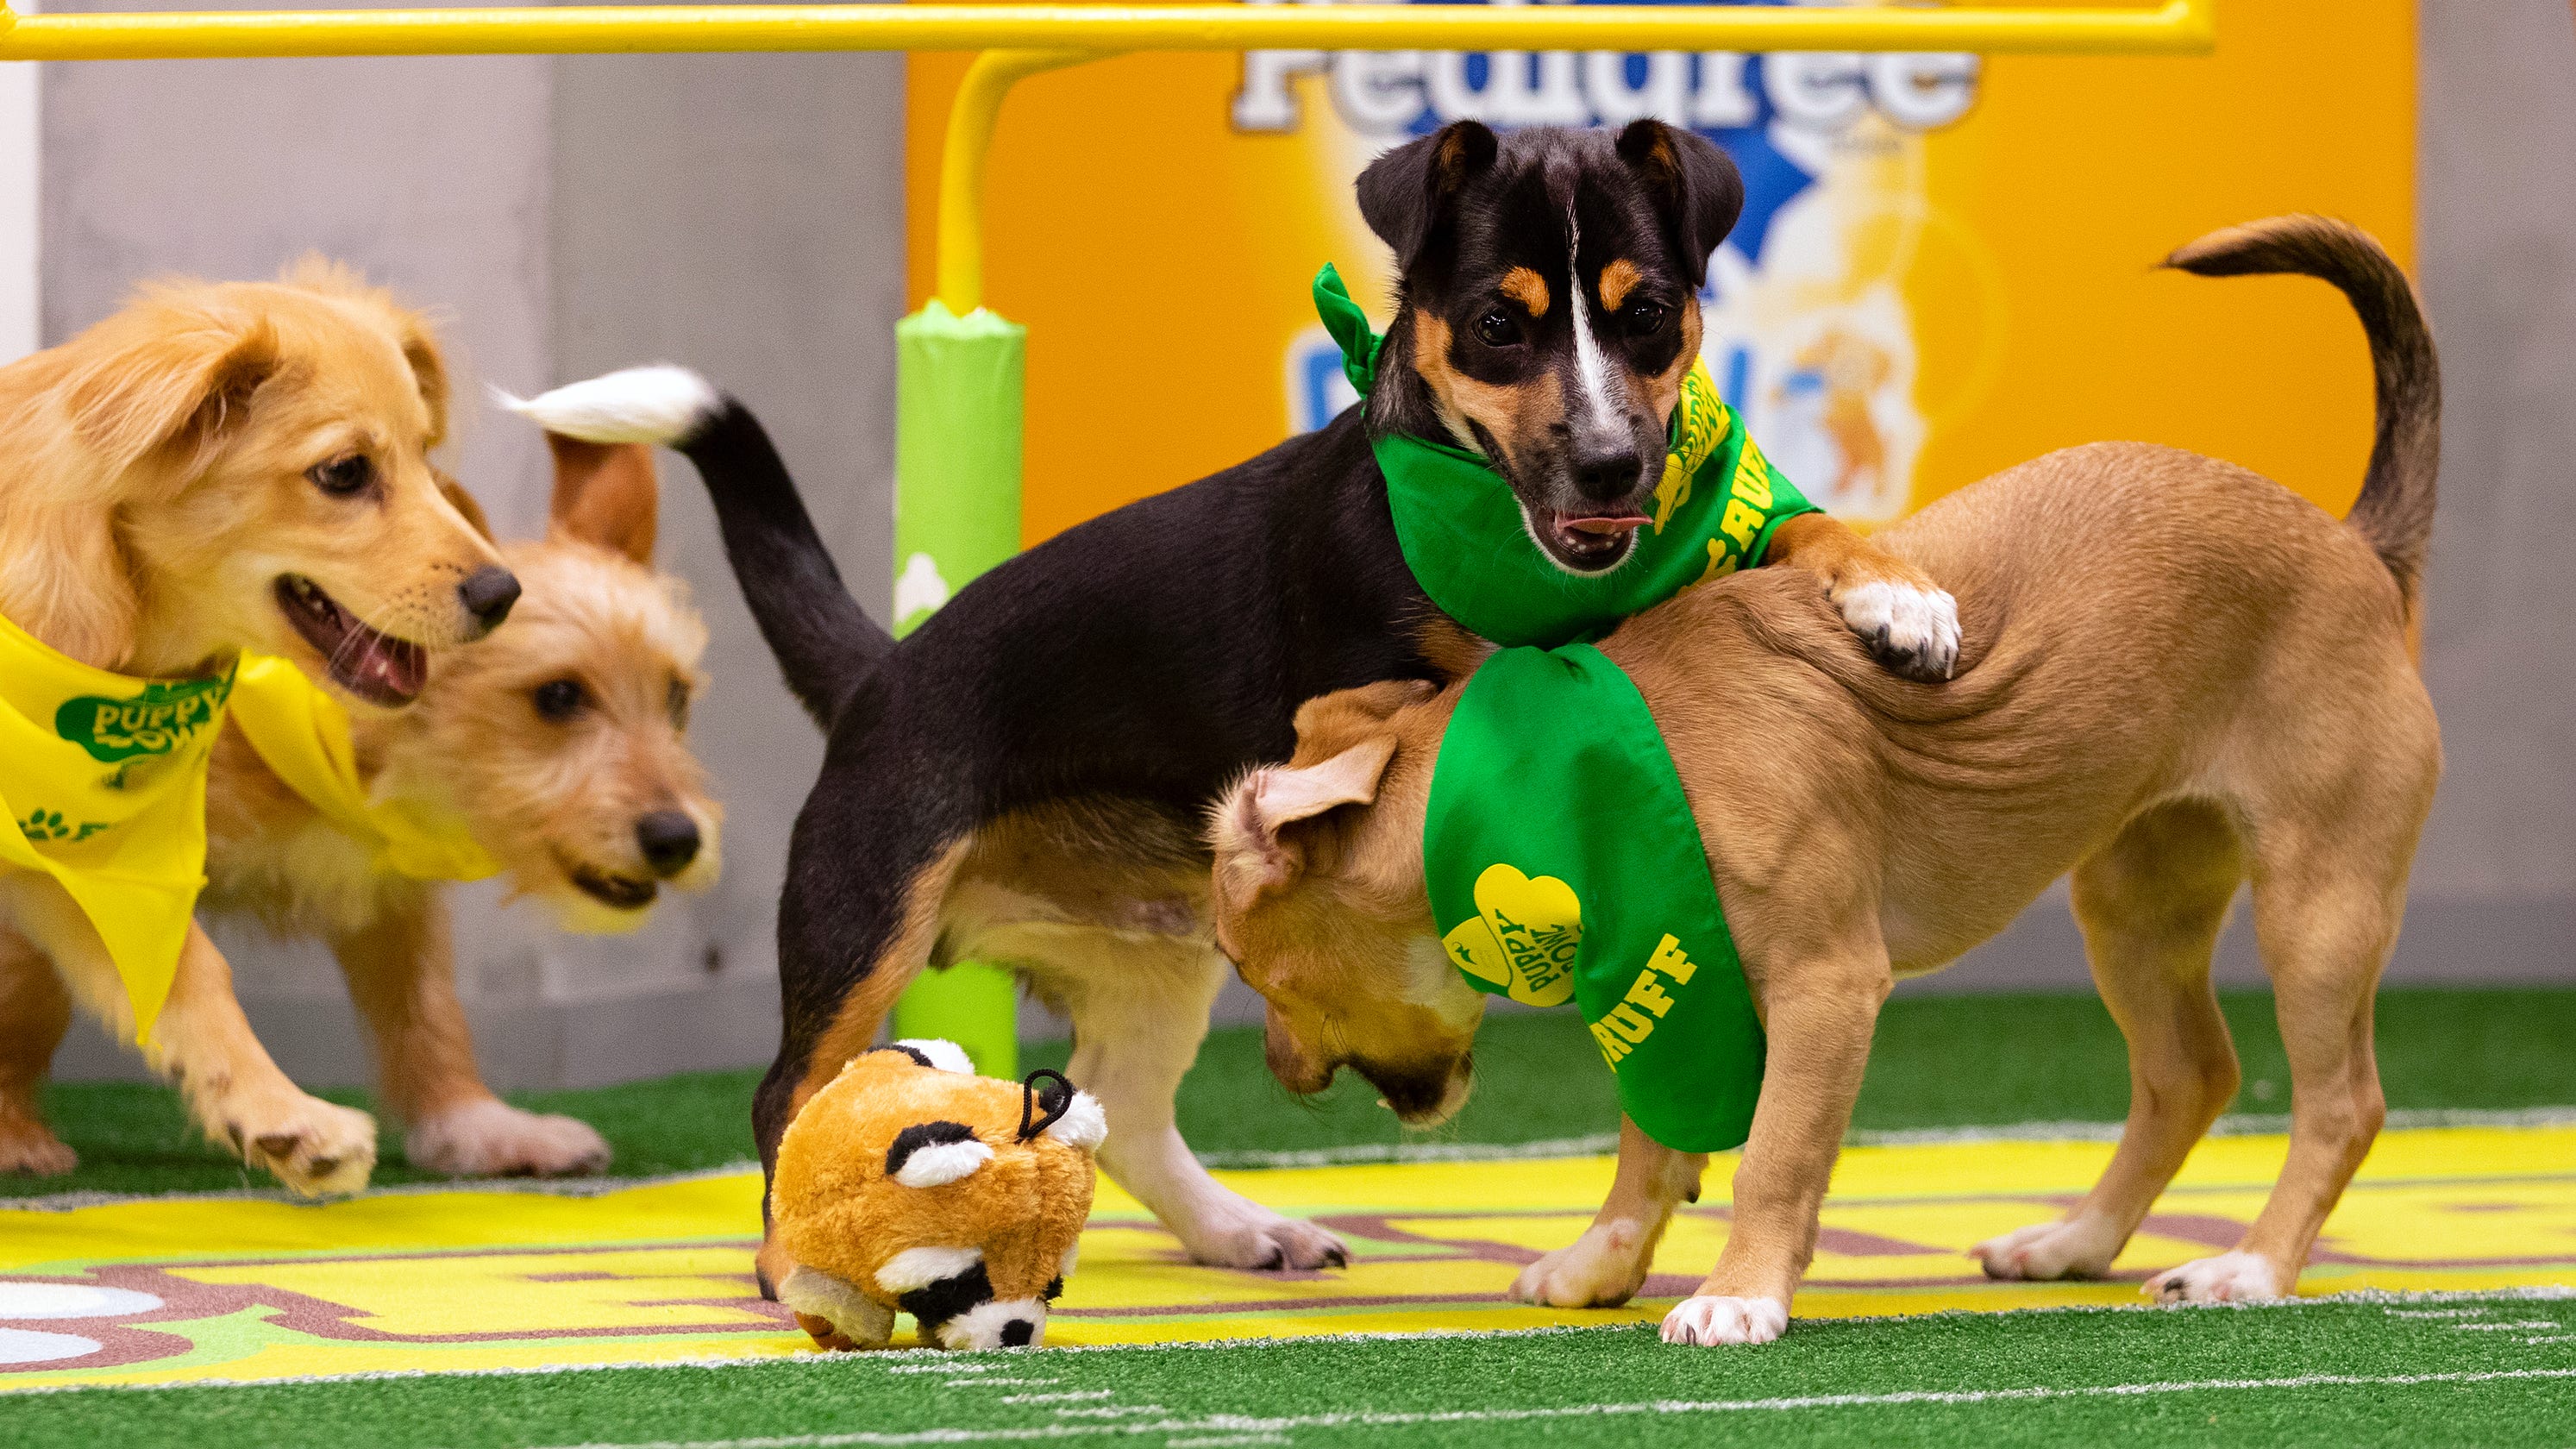 Puppy Bowl 2019: 6 Nashville dogs to compete in Animal Planet's Super Bowl show2987 x 1680